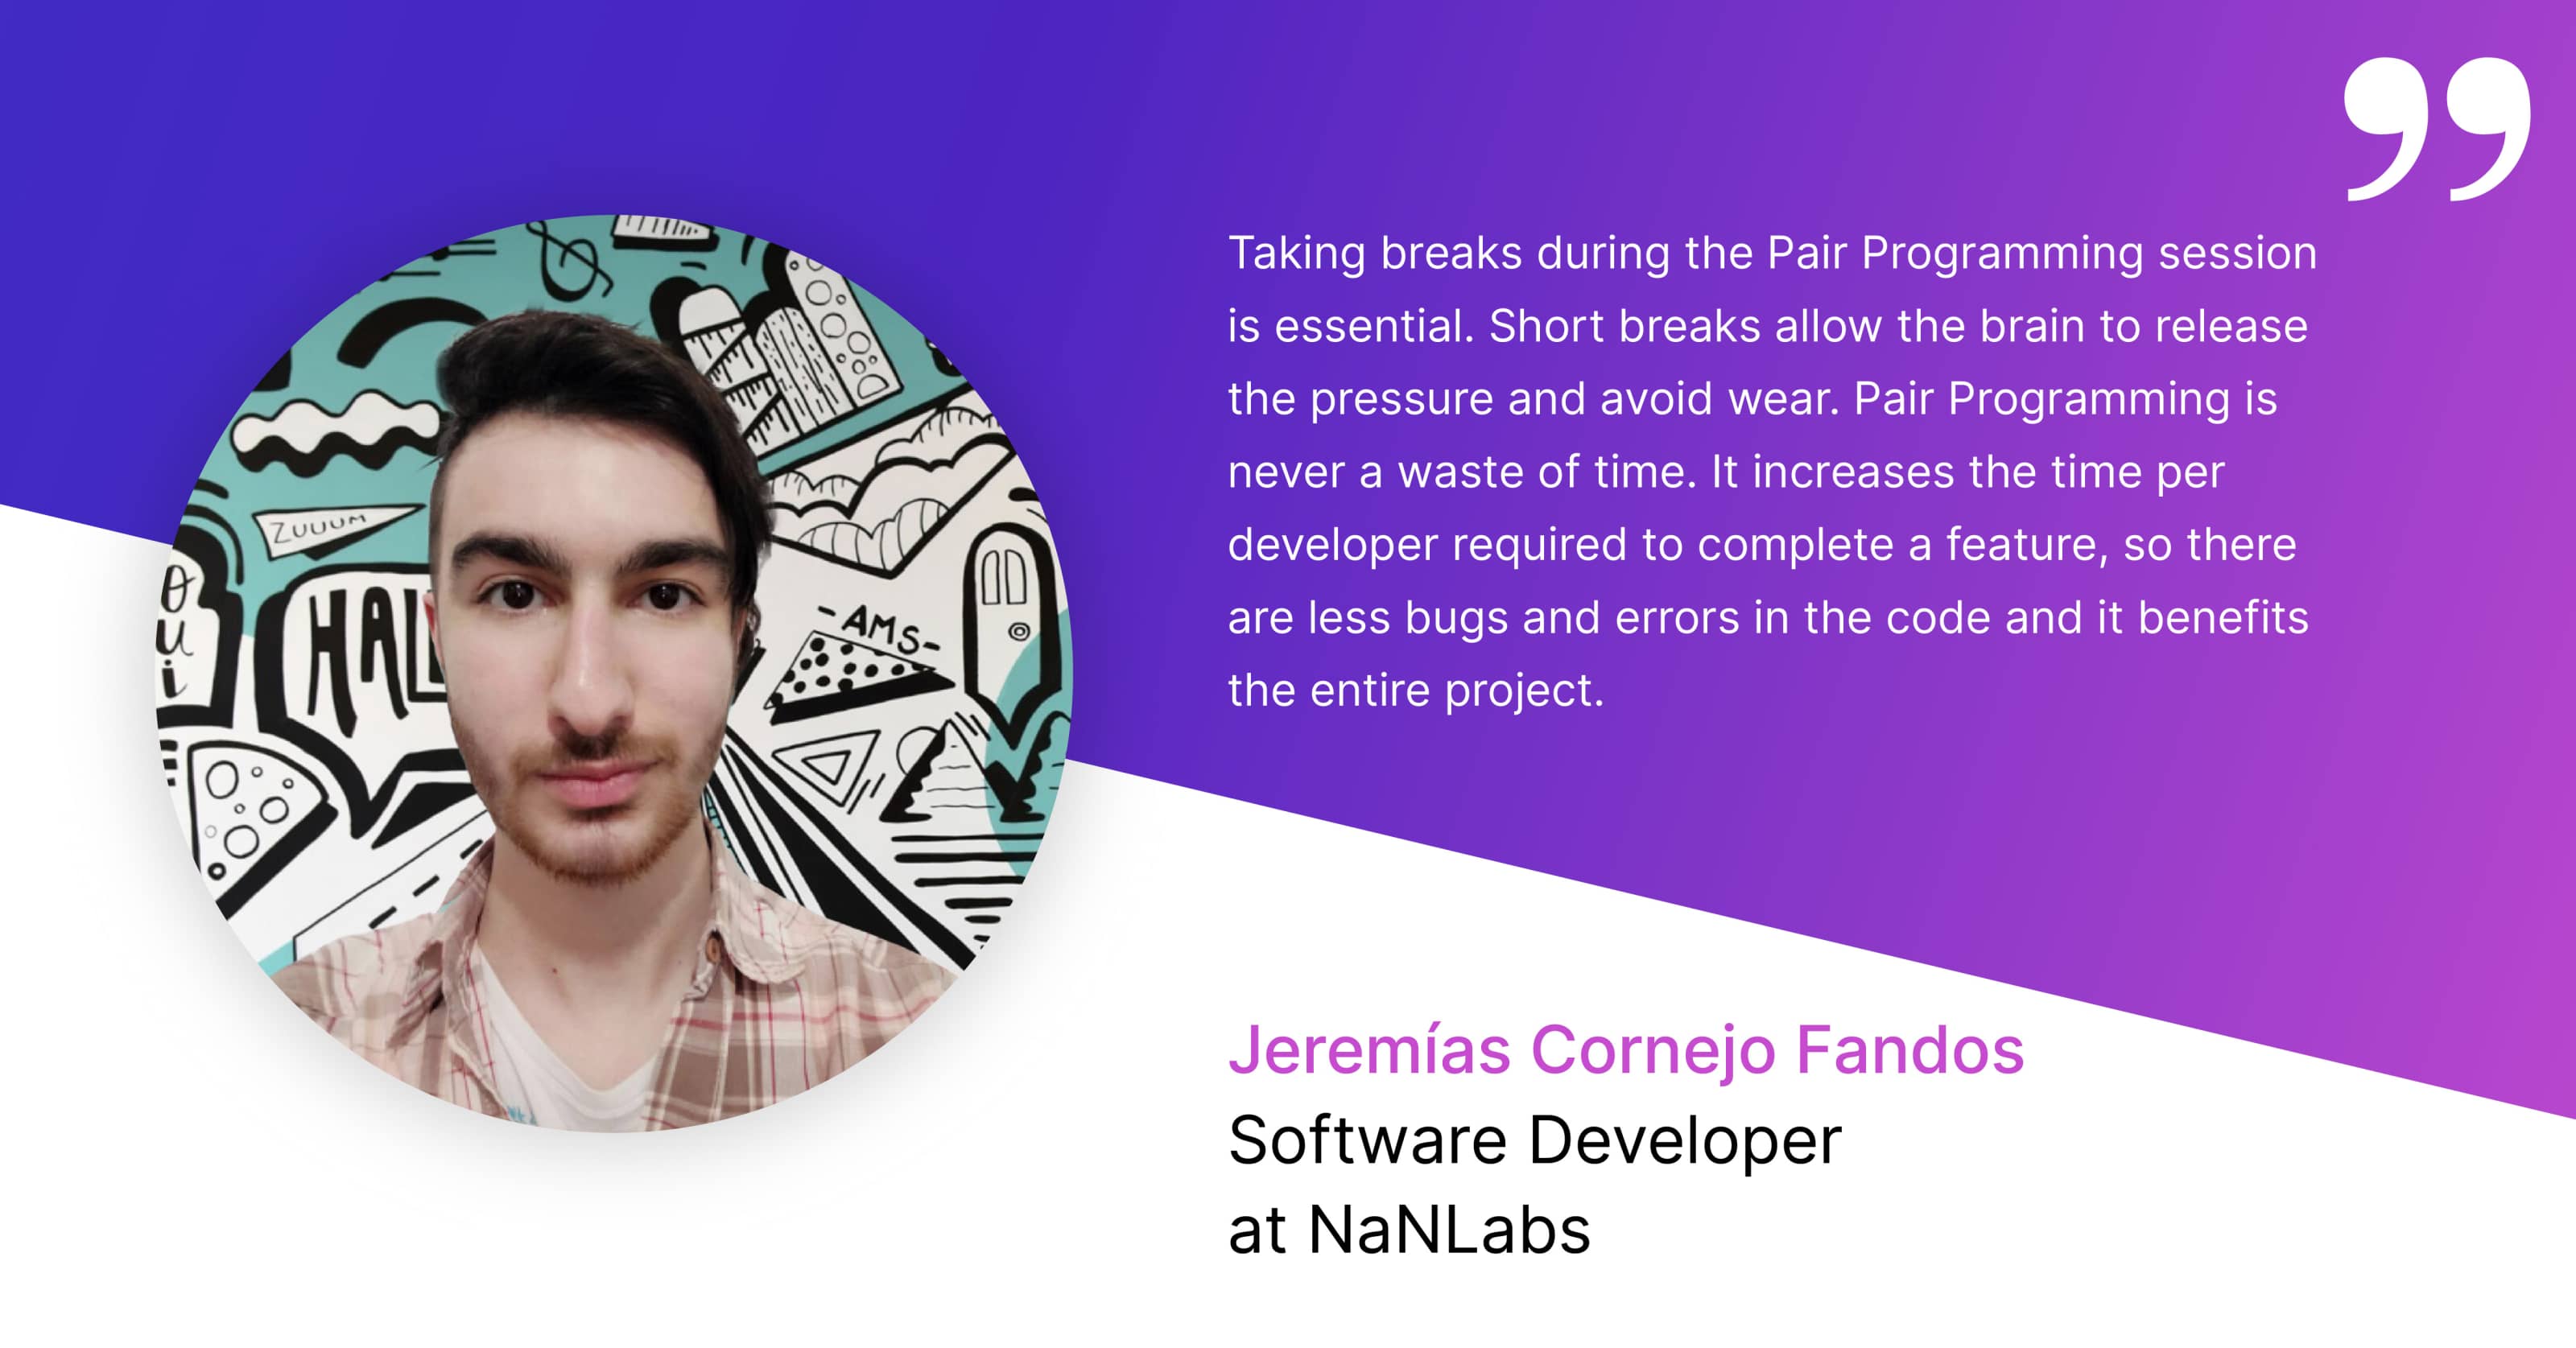 A graphic of a quote by Ulises Jeremías Cornejo Fandos, Software Developer at NaNLabs discussing the necessity of taking regular breaks during a pair programming session in Agile.